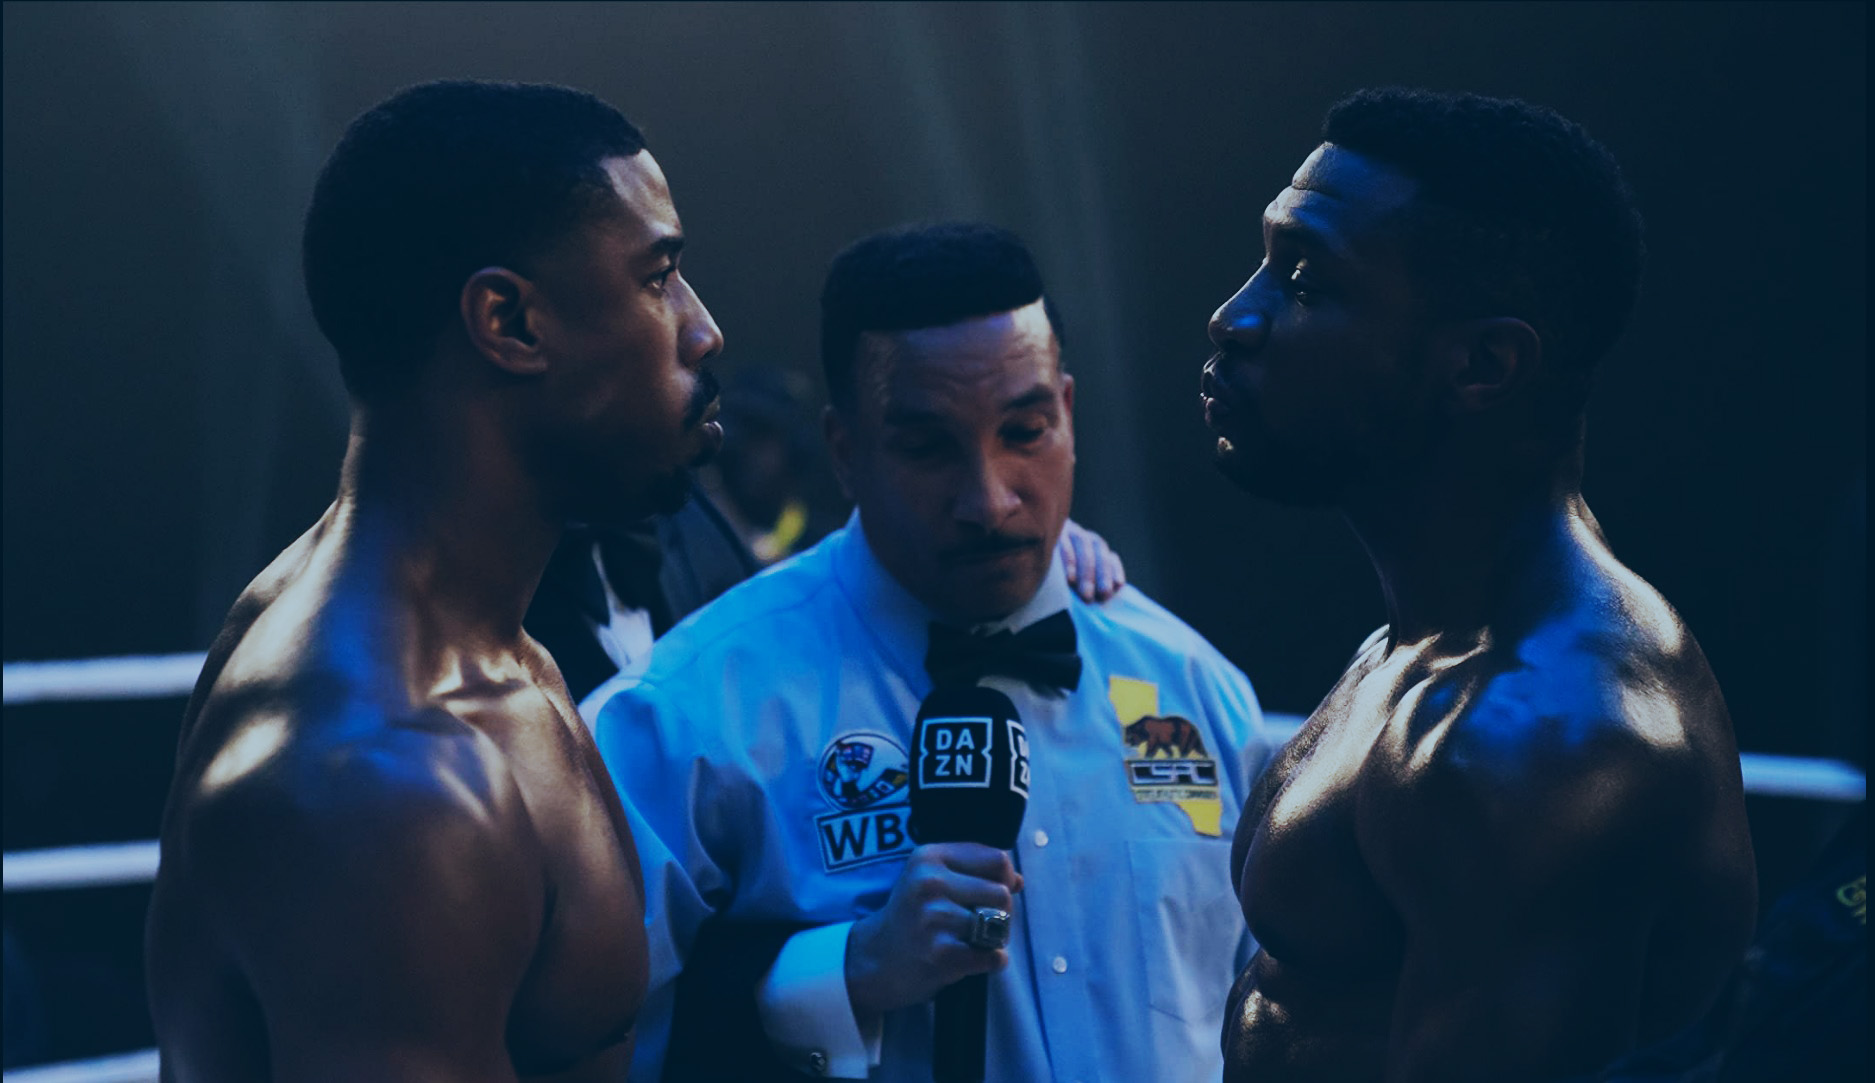 In a boxing ring, an umpire stands between two boxers who stare hard at each other.